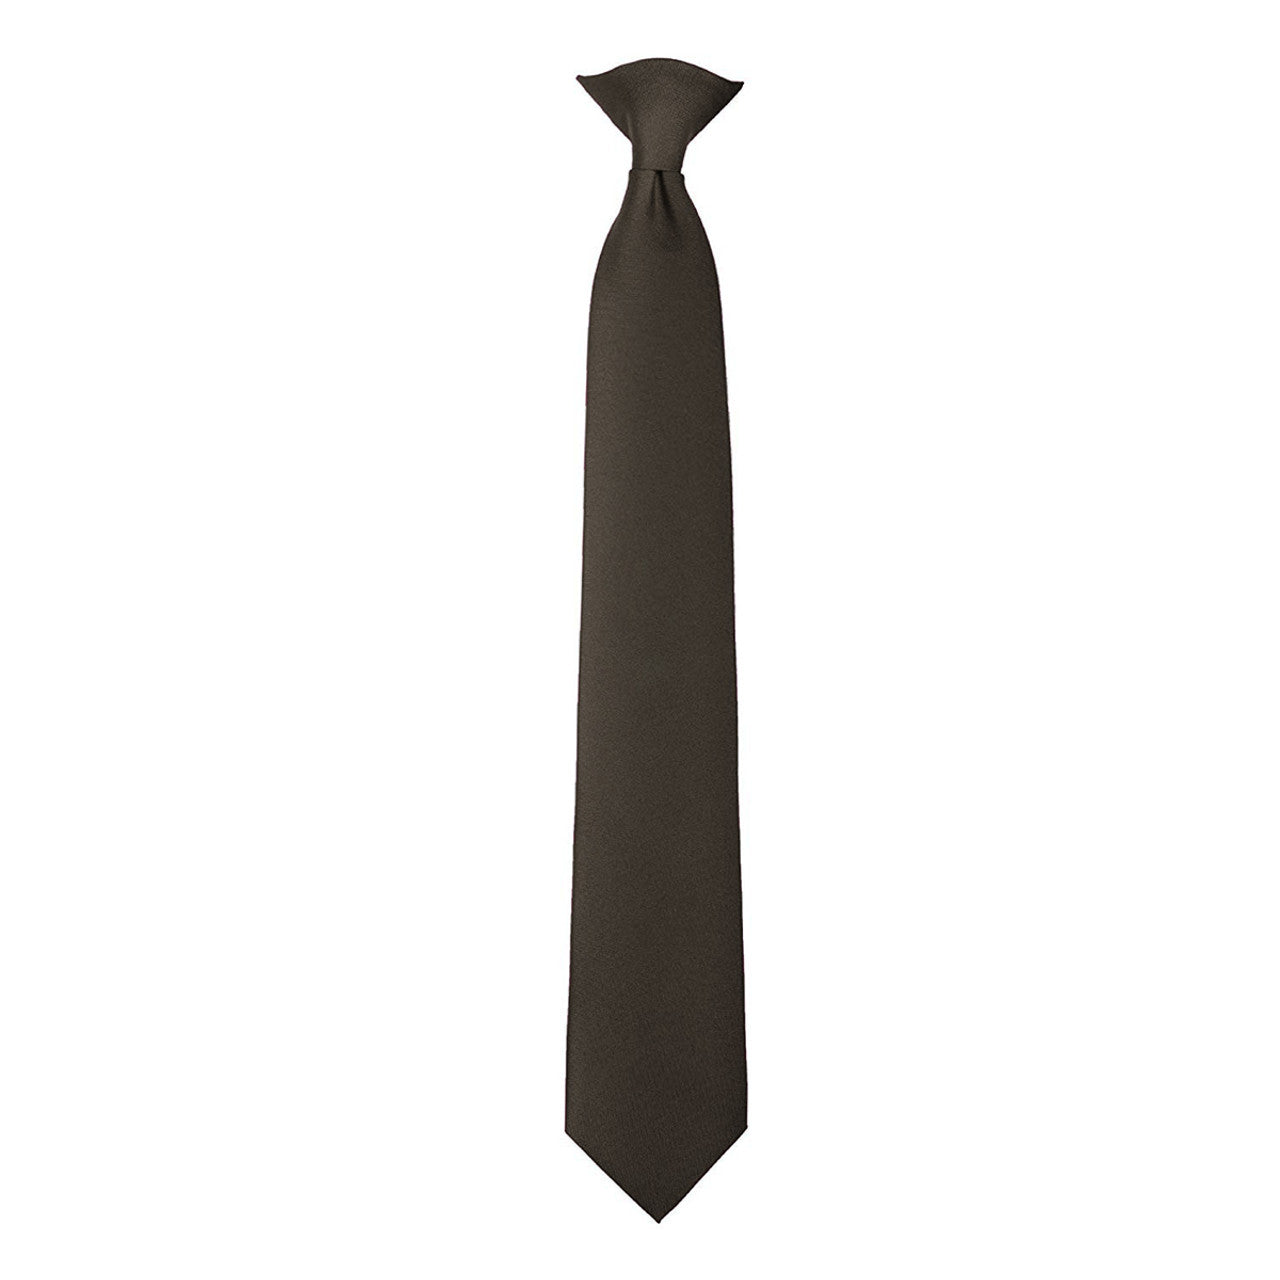 SAMUEL BROOME - CLIP-ON NECKTIE WITH BUTTONHOLES